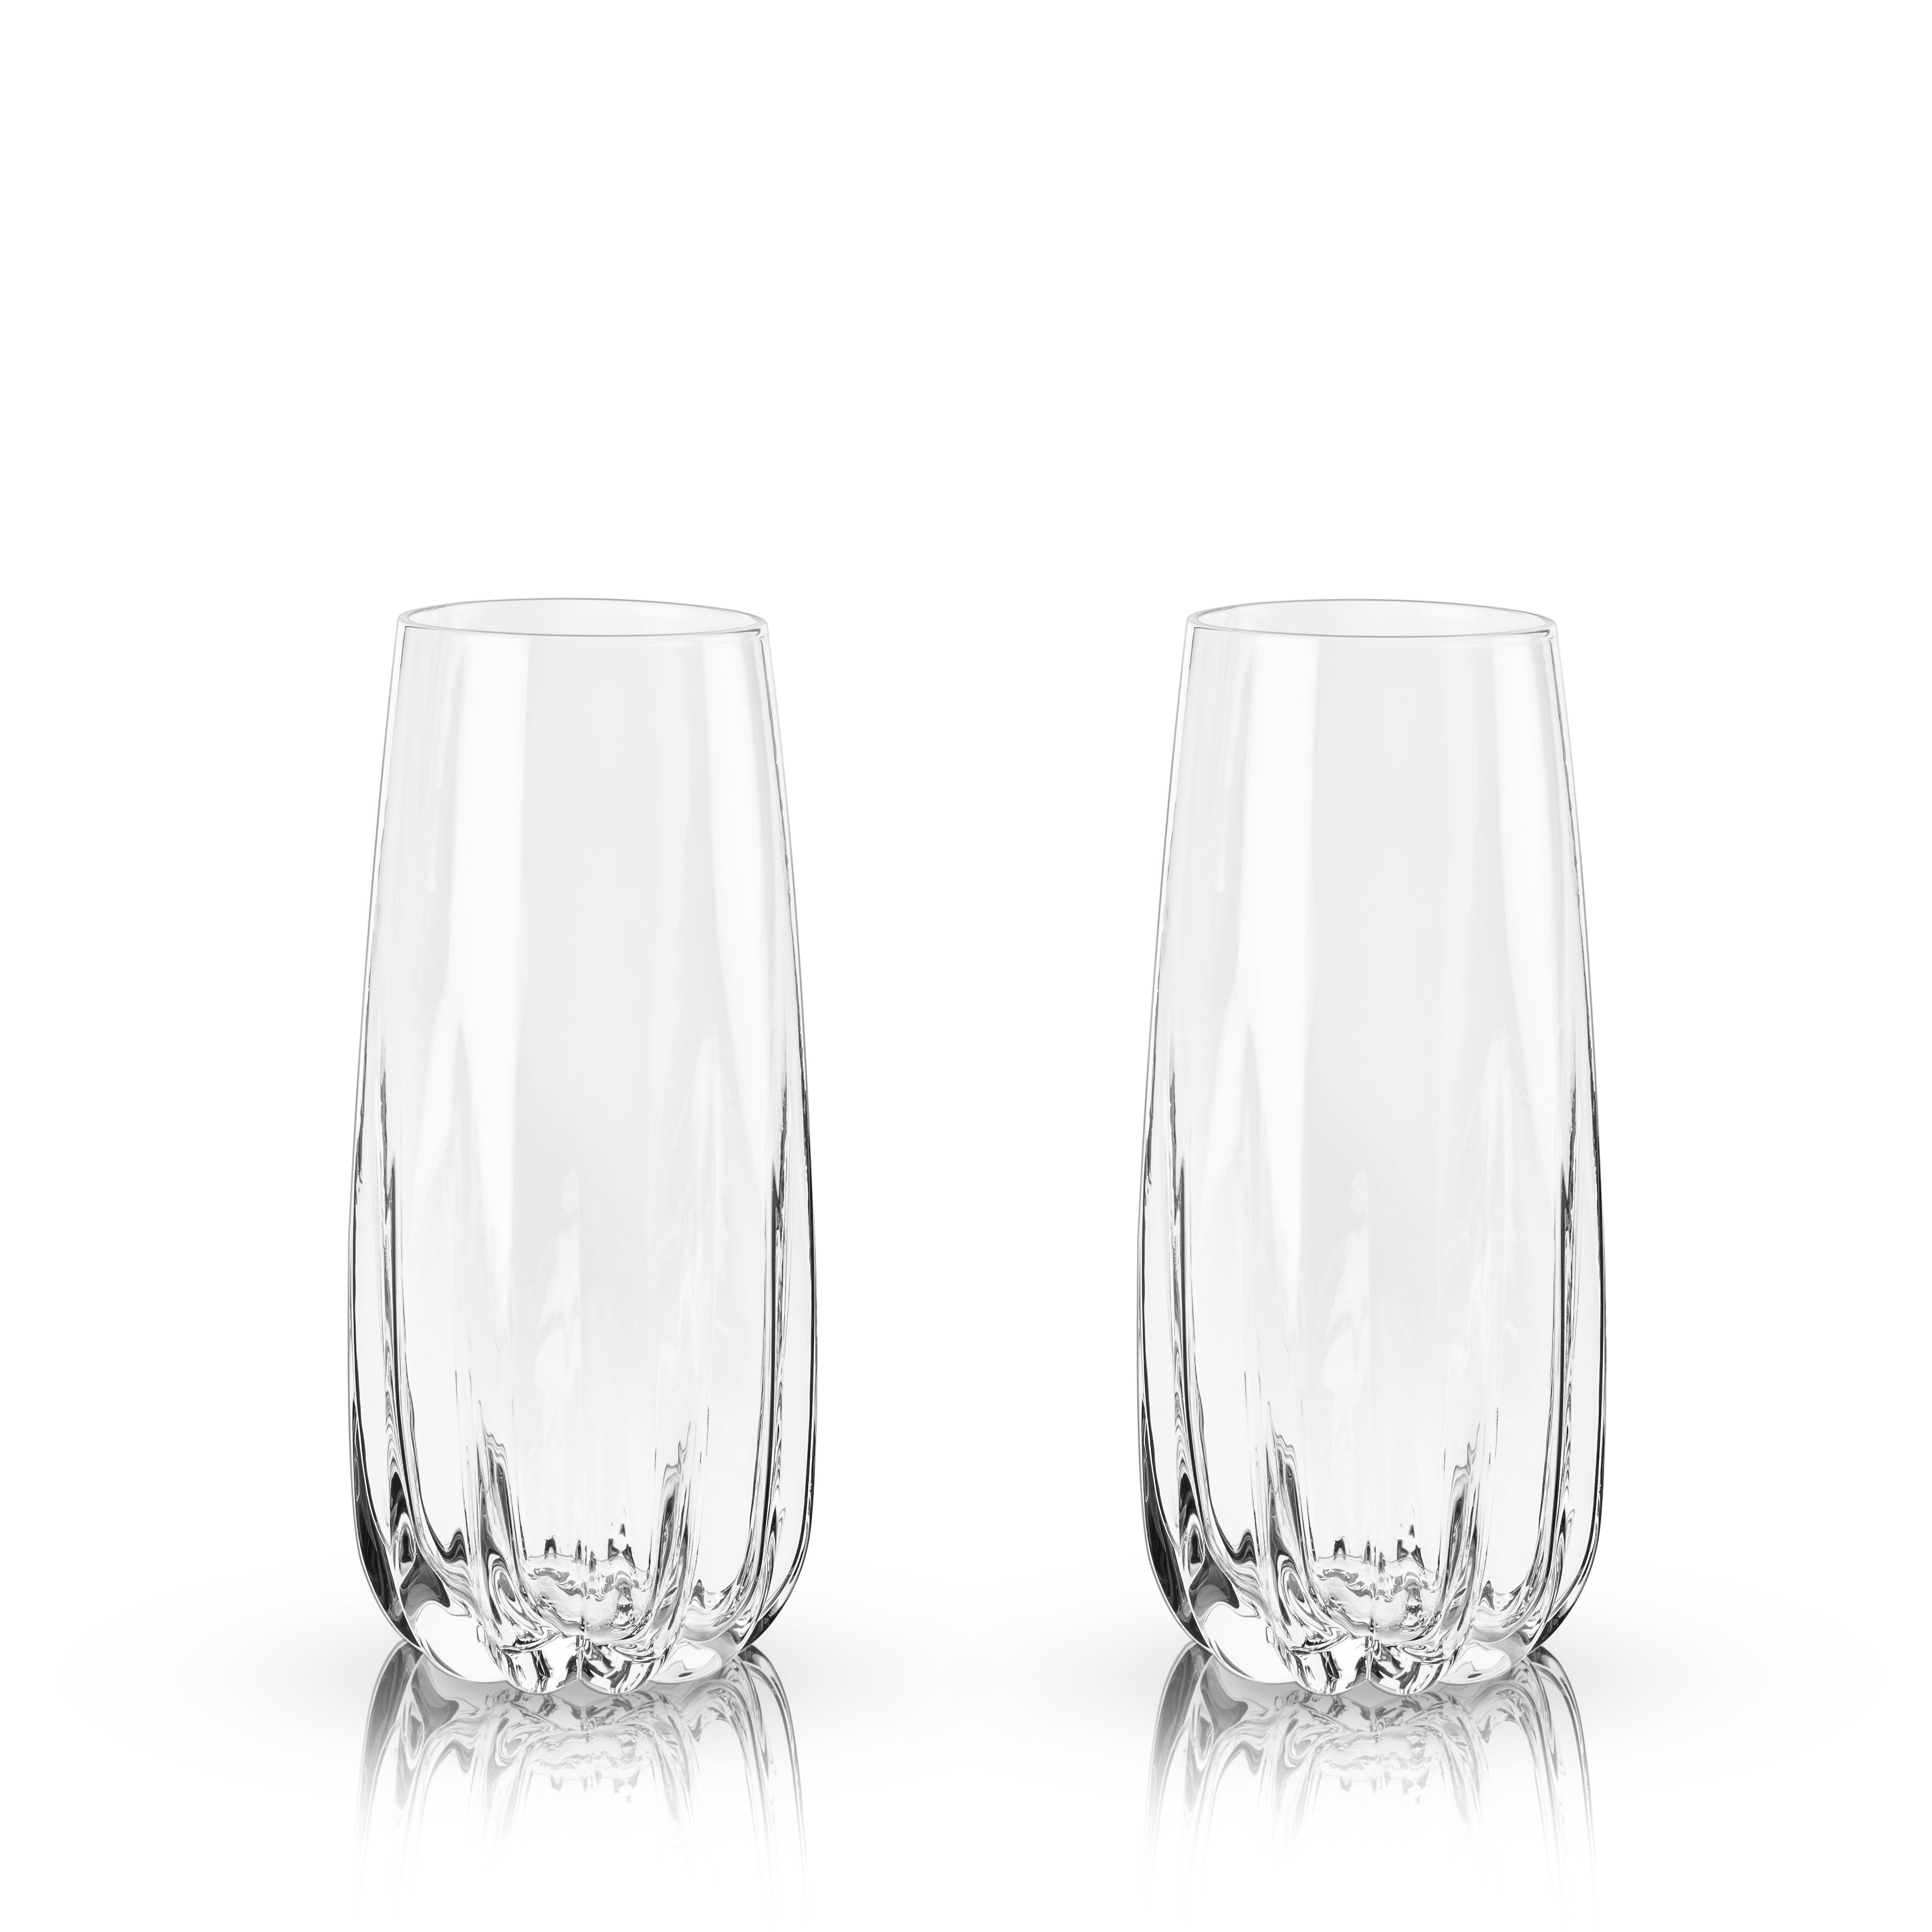 Viski Weighted Stemless Champagne Flutes - Modern Crystal Wine Martini  Mimosa Cocktail Glasses Round Footed Base, Bar Fluted Glassware,  Housewarming Wedding Champagne Gift - Set of 2, 9.5 oz, Clear